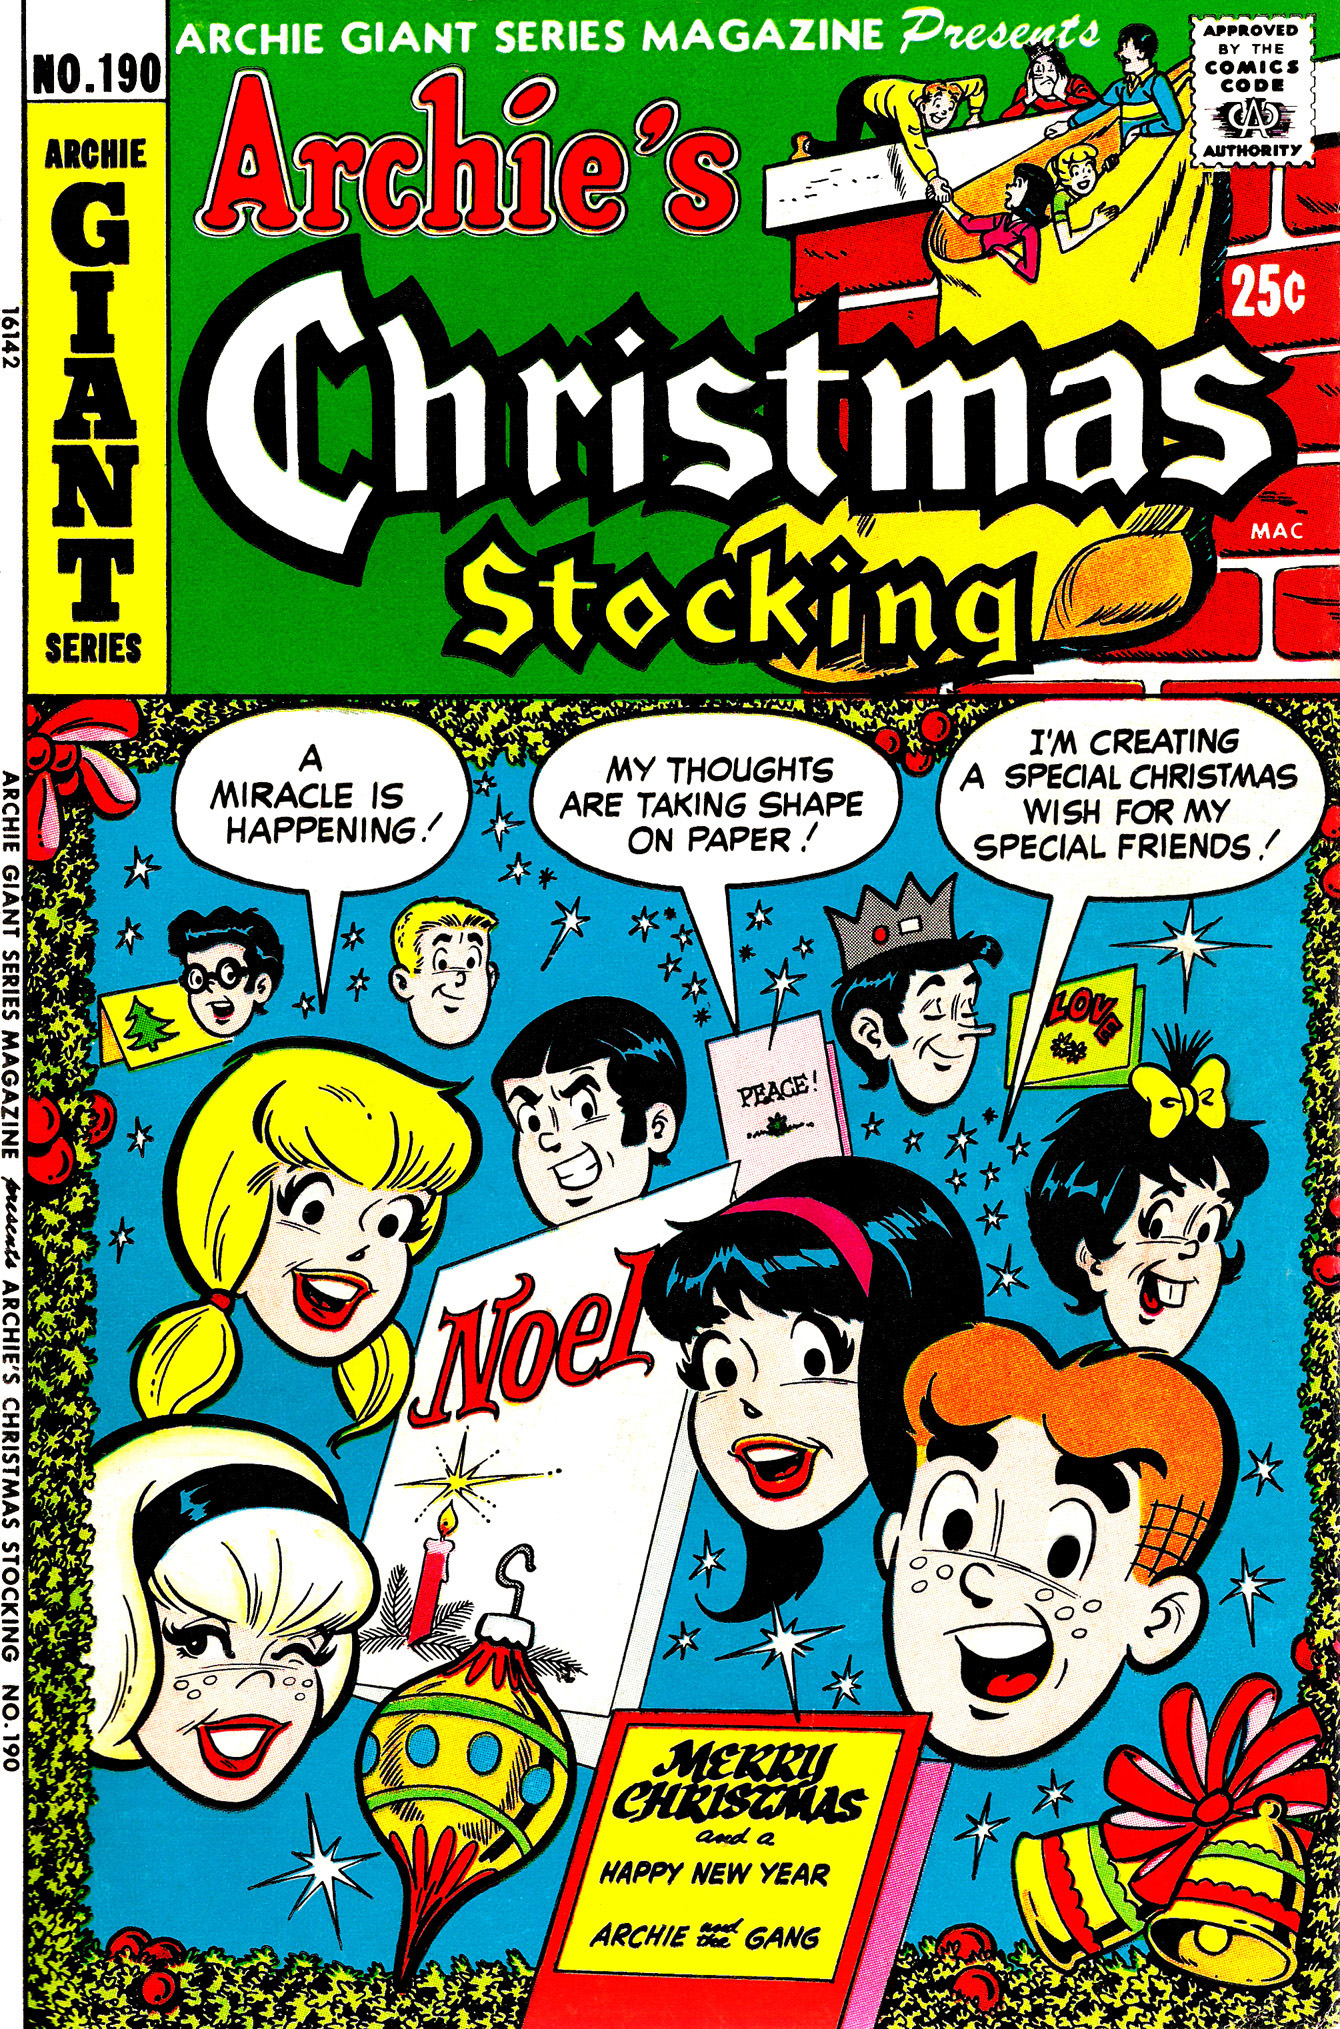 Read online Archie Giant Series Magazine comic -  Issue #190 - 1